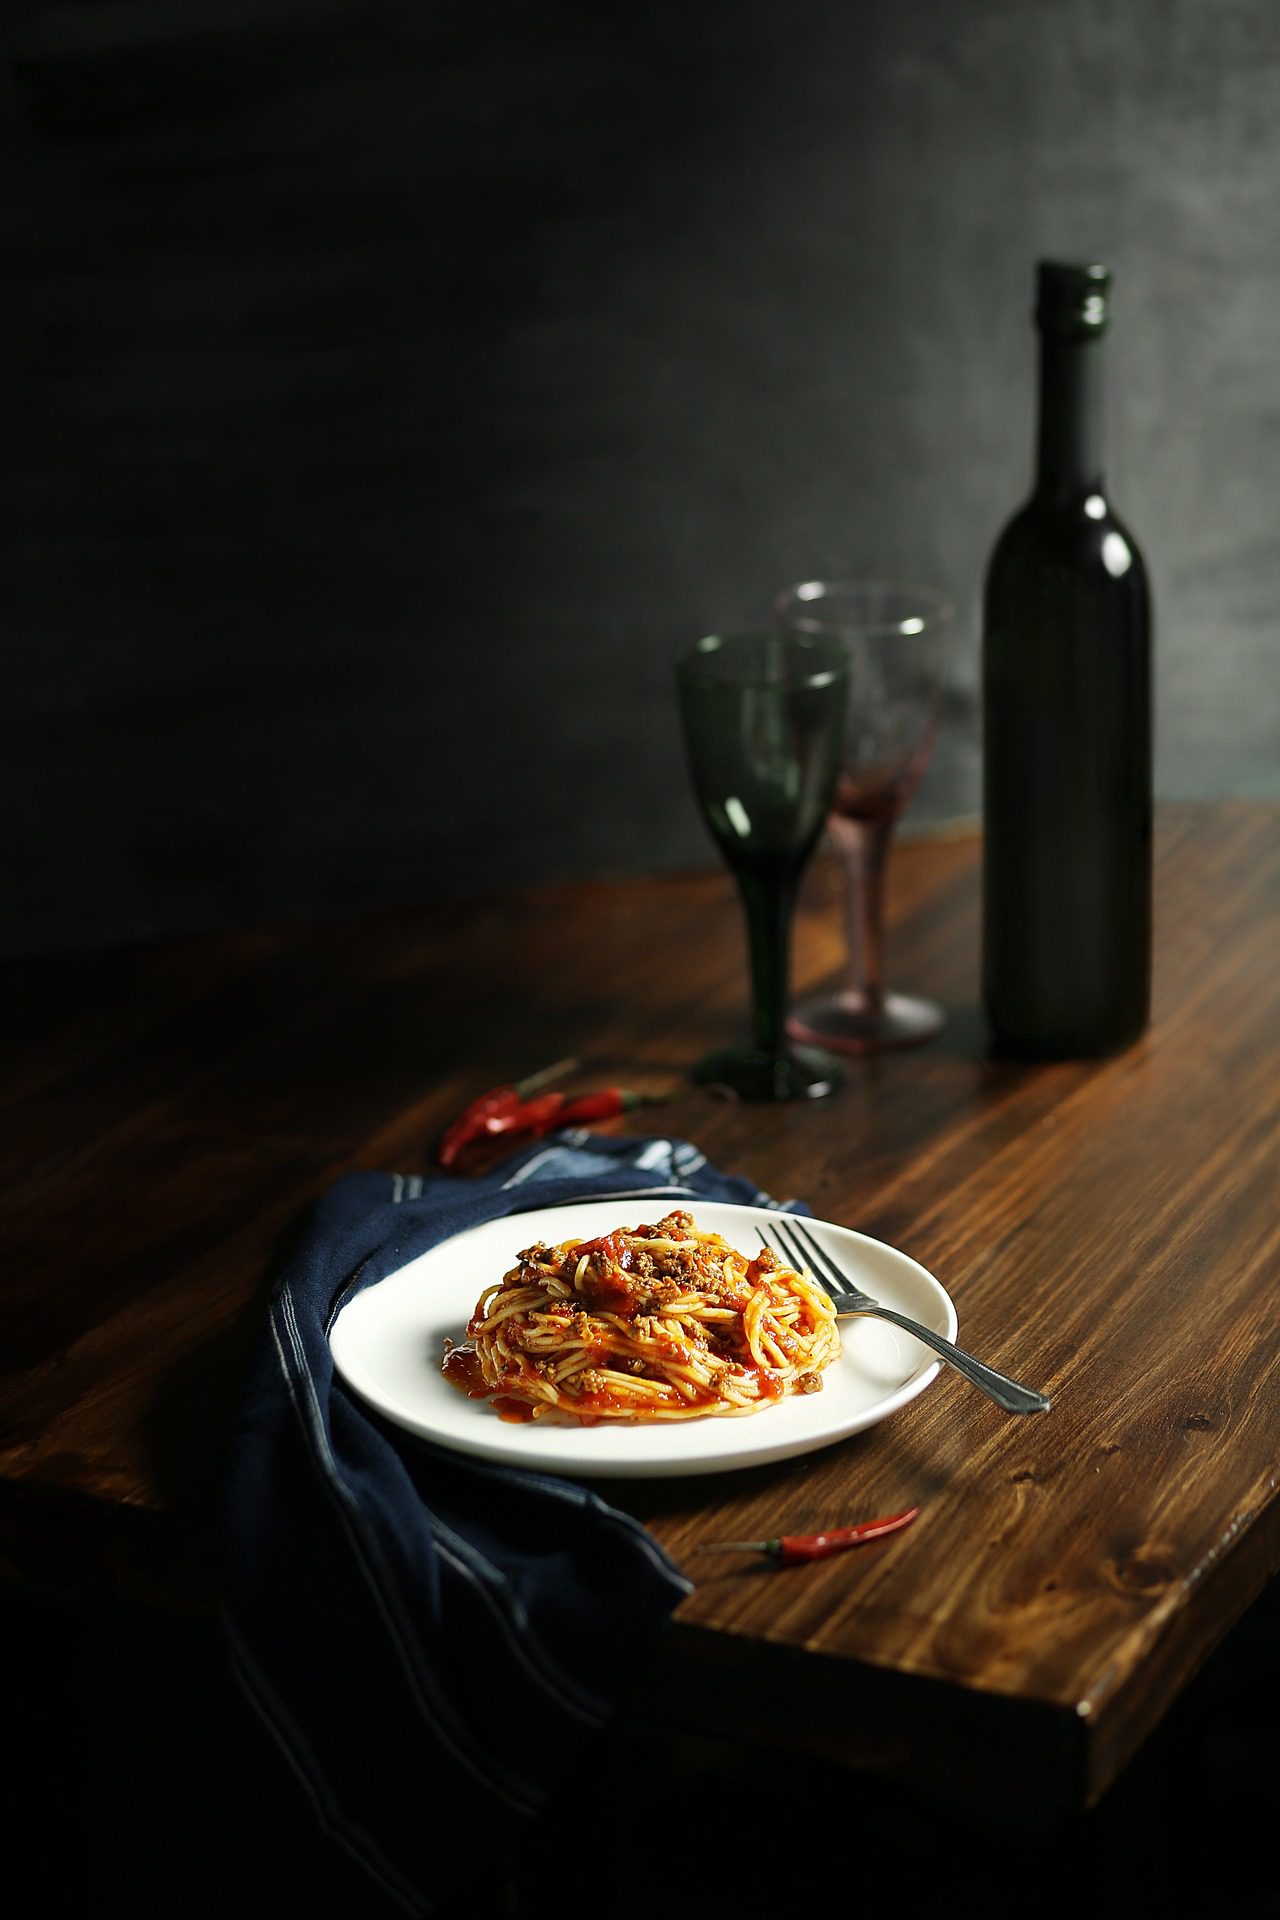 Plate of pasta with a bottle of wine and two glasses